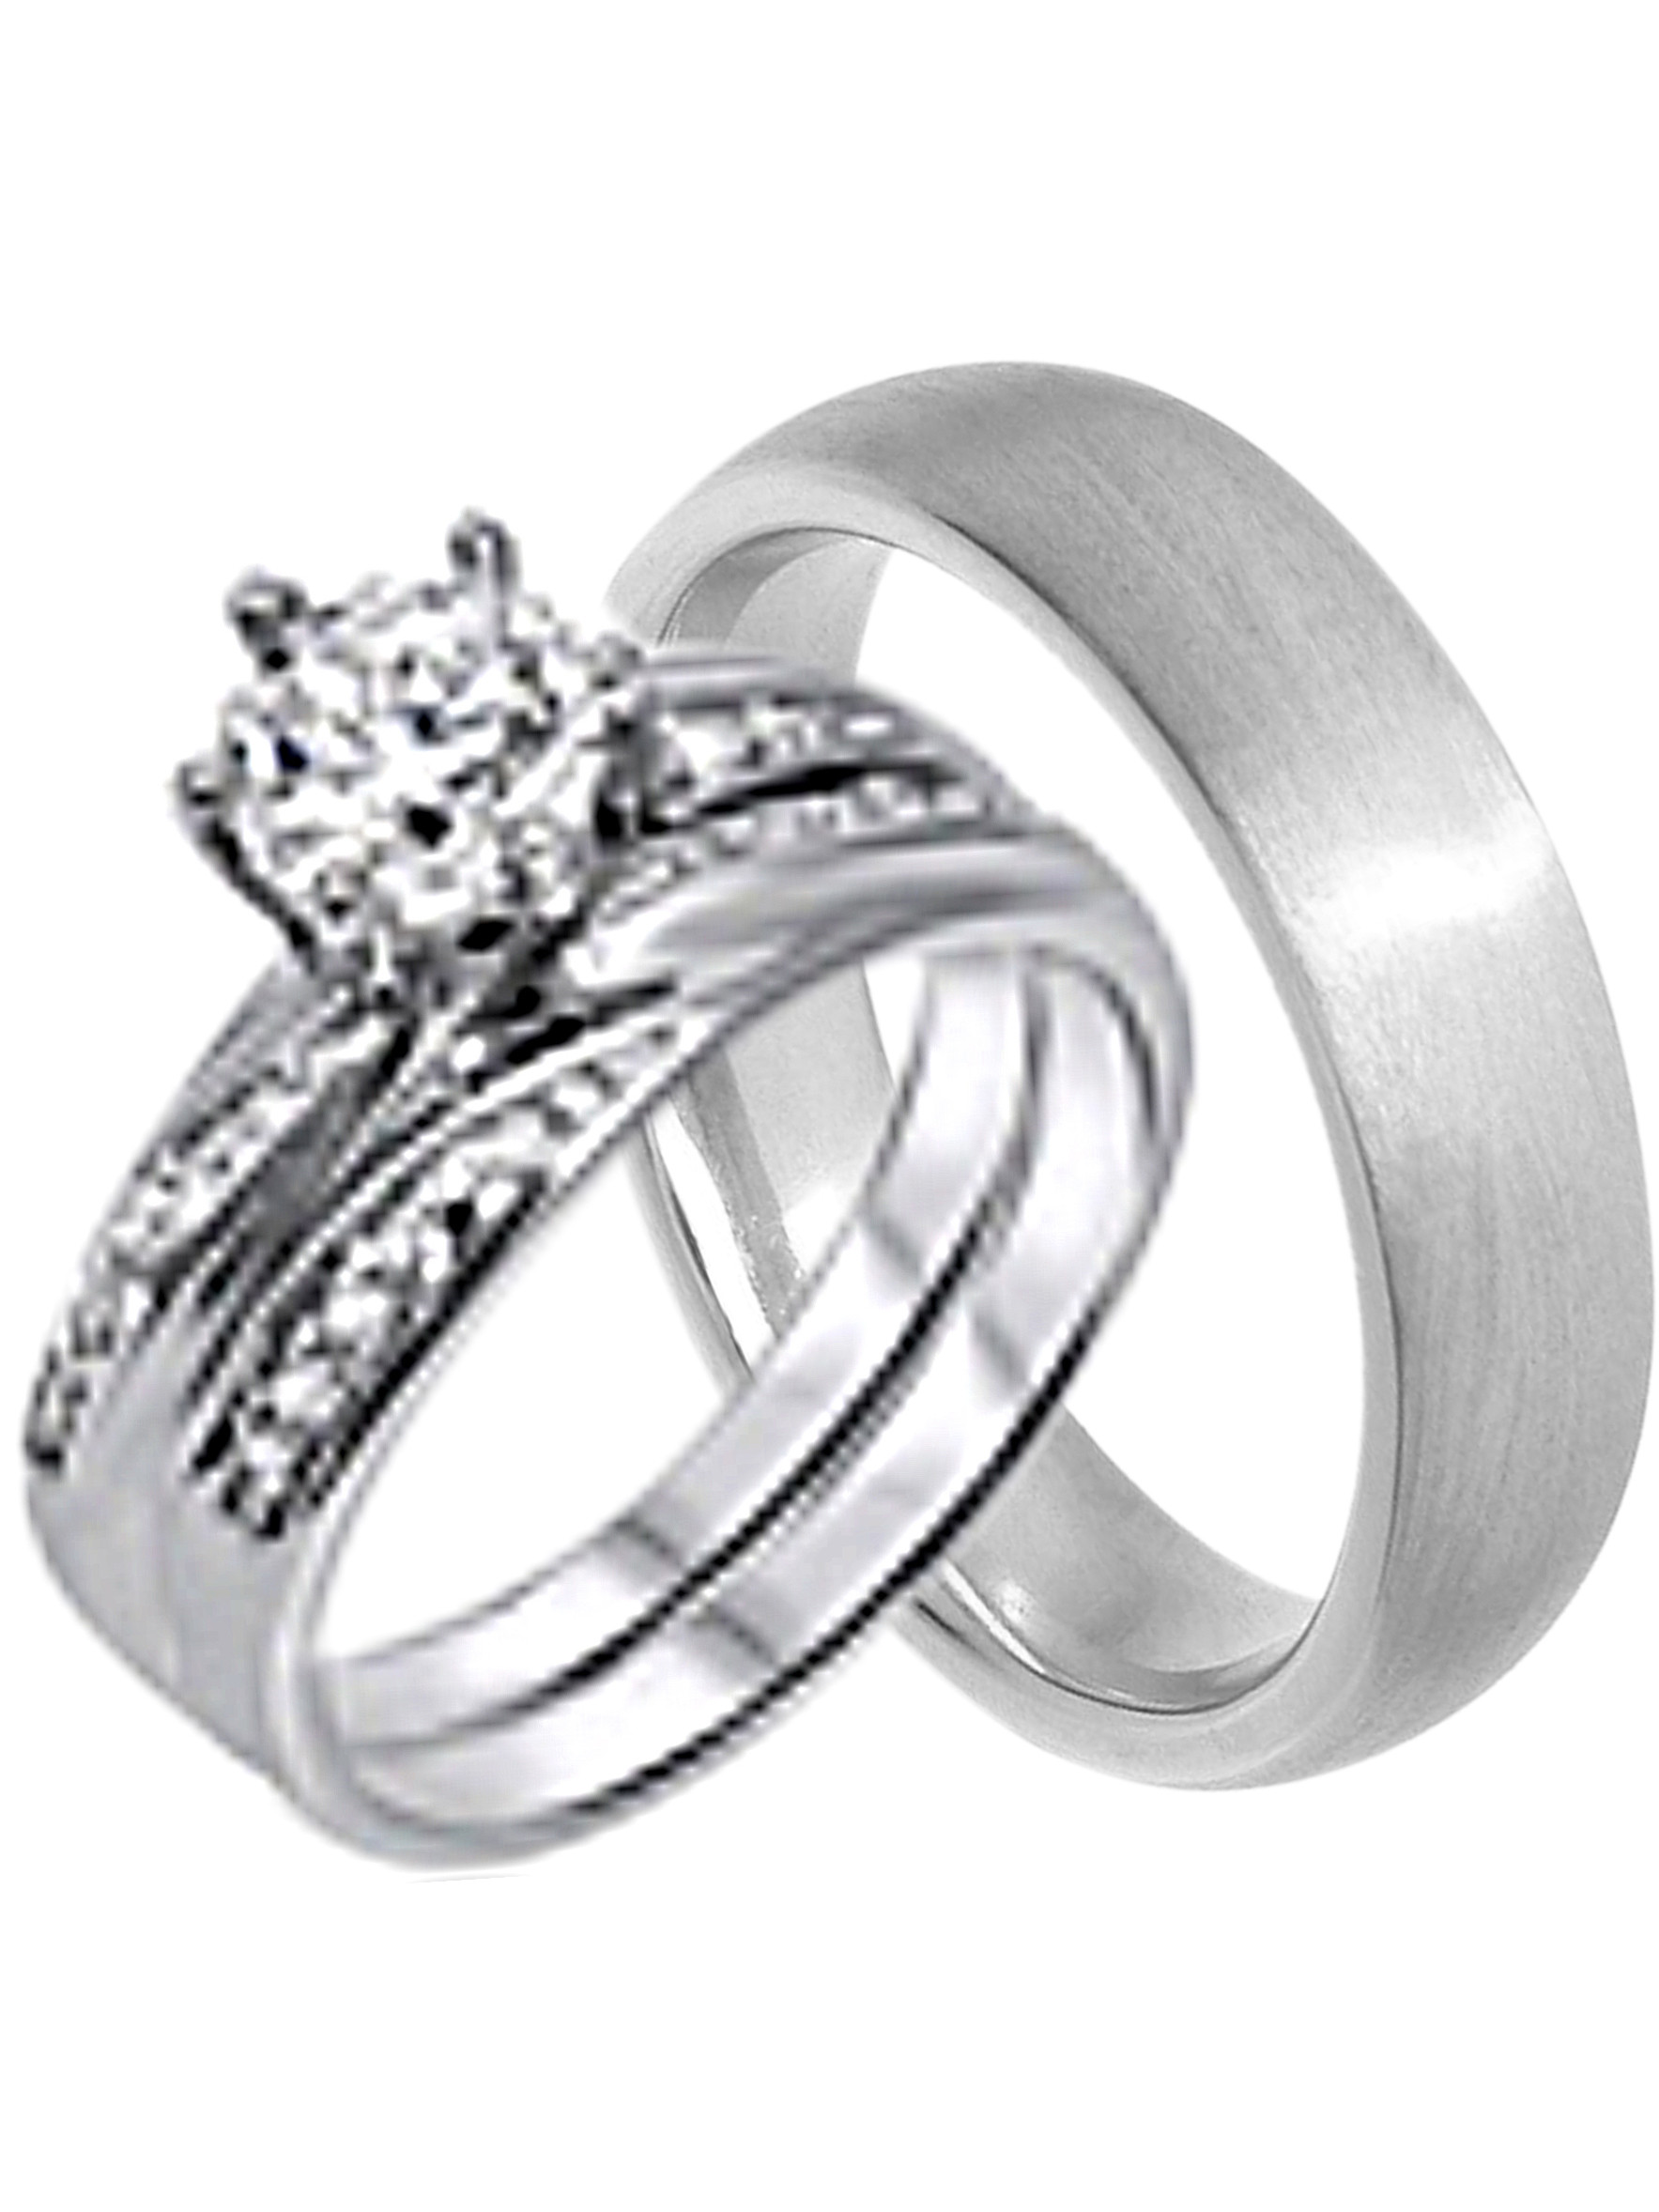 Walmart His And Hers Wedding Rings
 His and Hers Wedding Ring Set Cheap Wedding Bands for Him